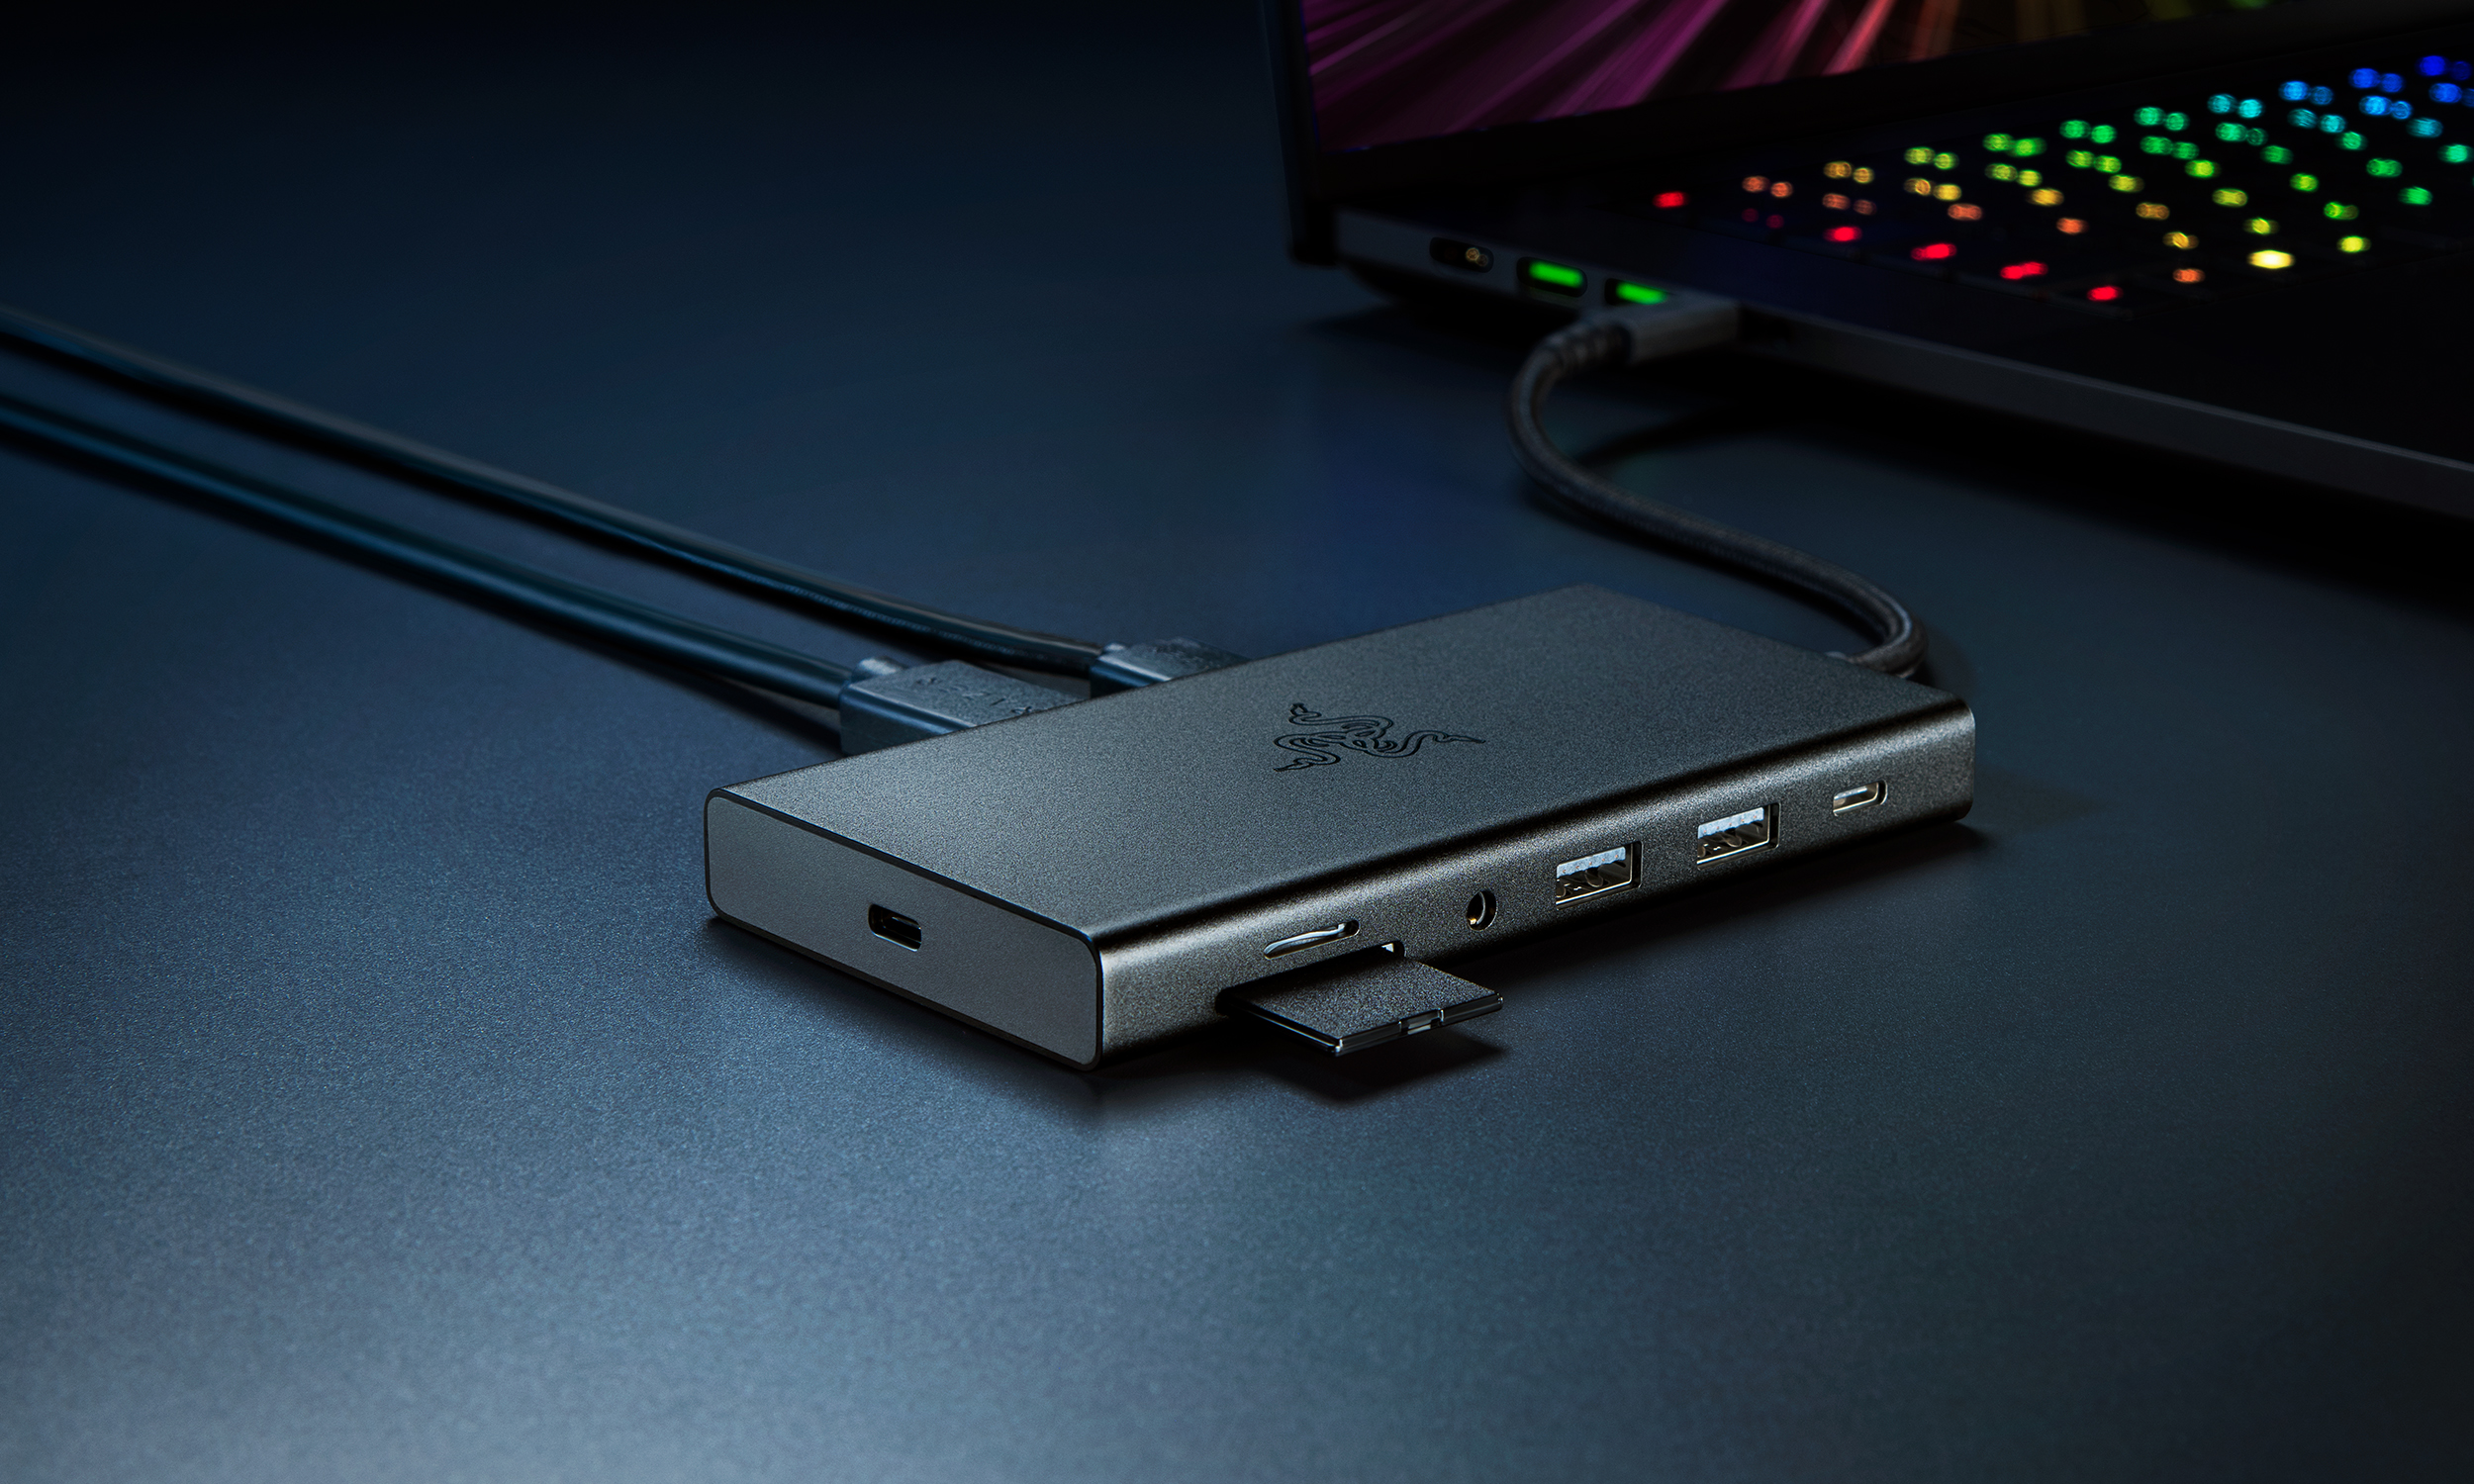 Product marketing photo of the Razer USB C Dock. The hub sits on a table with a gaming laptop behind it. It has several open ports and an SD card. It sits on a dark blue table with dramatic shades.